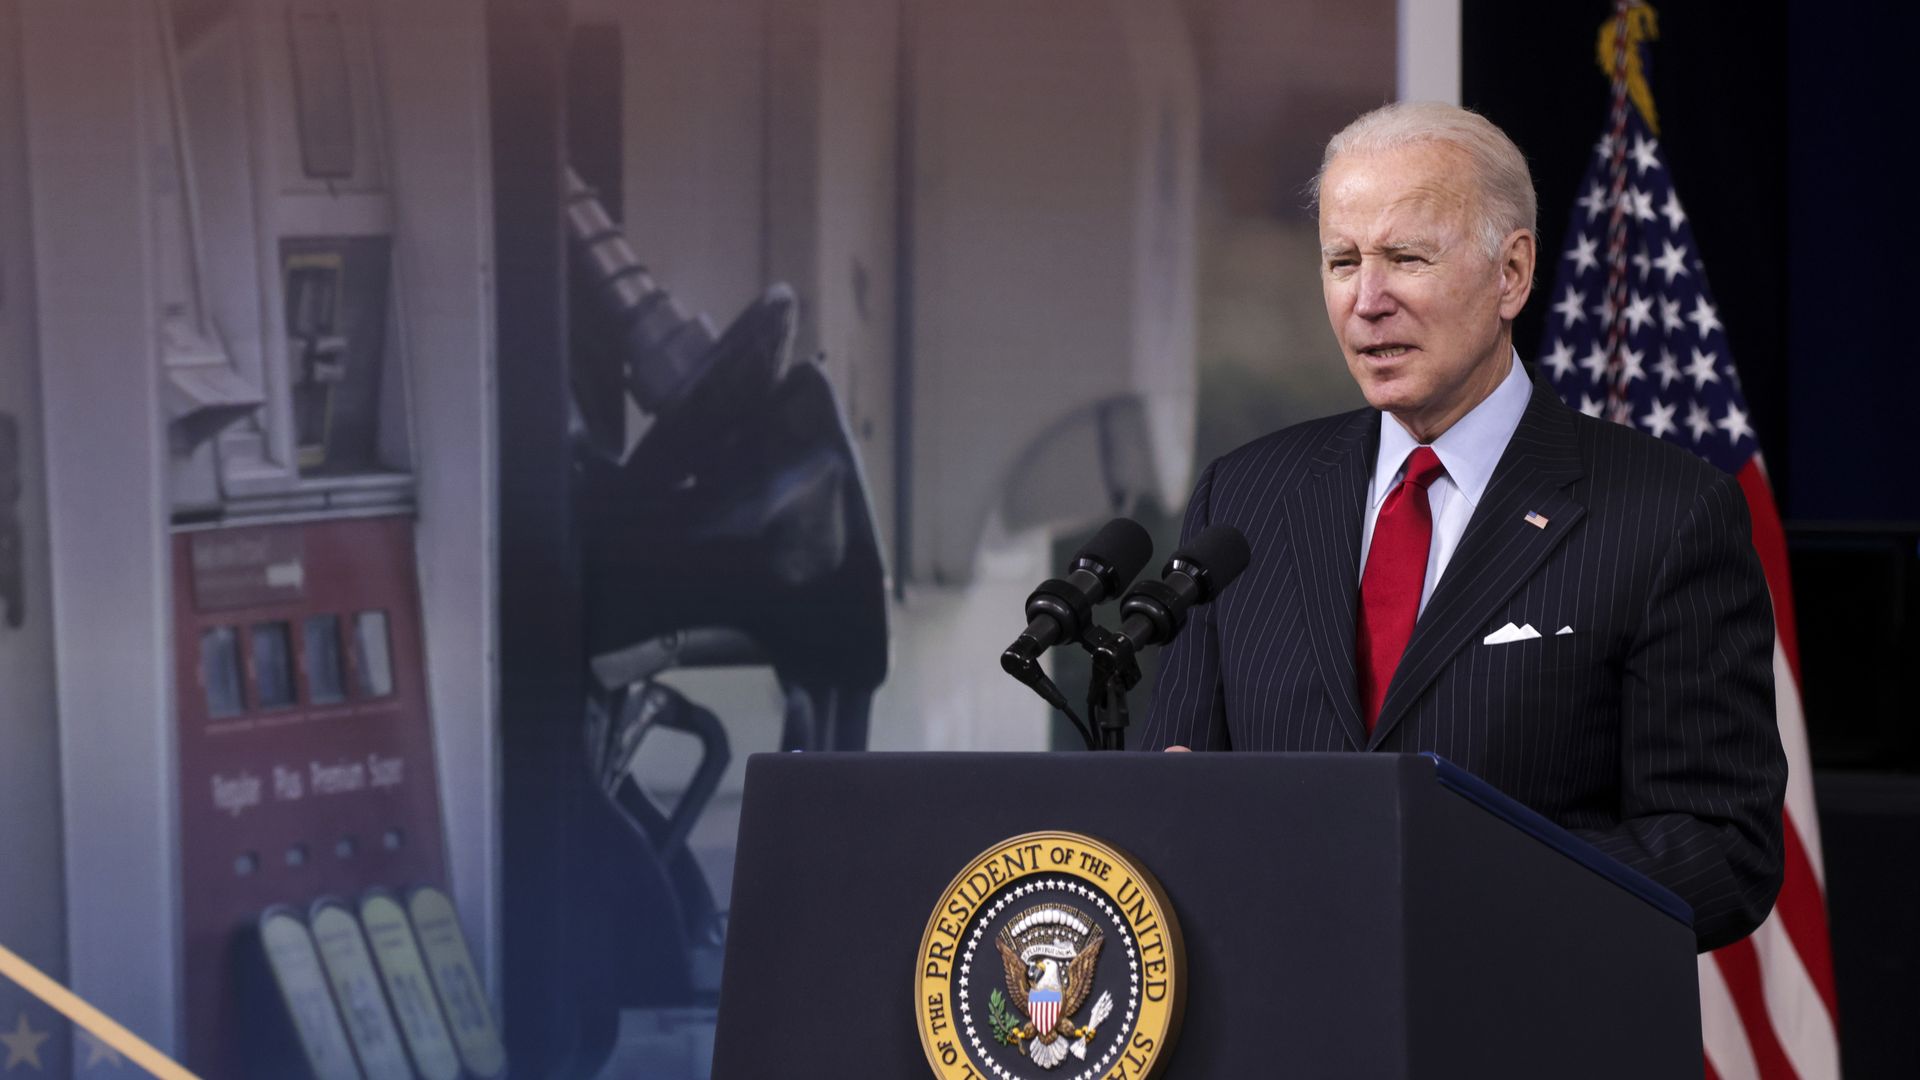 Photo of Joe Biden speaking from a podium with the American flag behind him